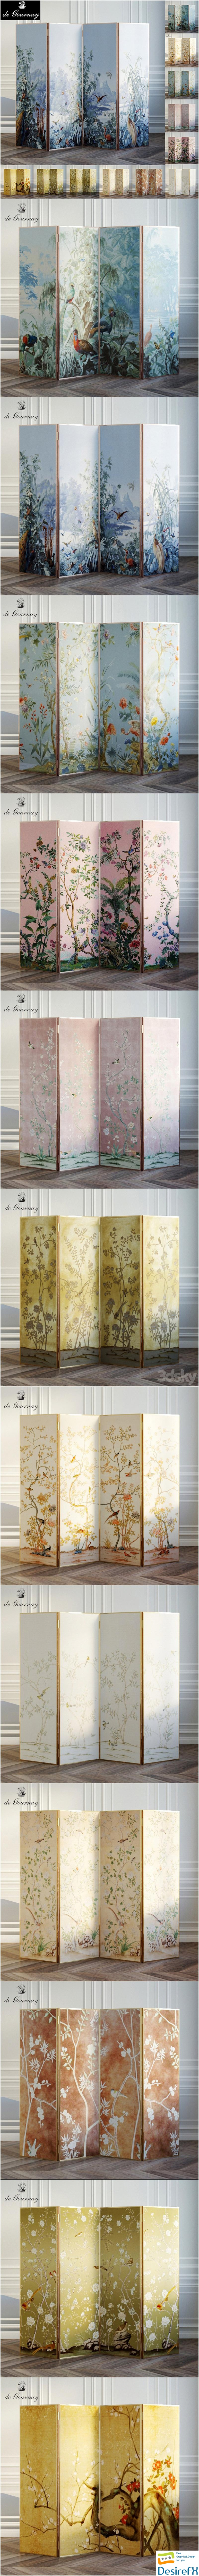 Screen covers with wallpaper De Gournay 3D Model